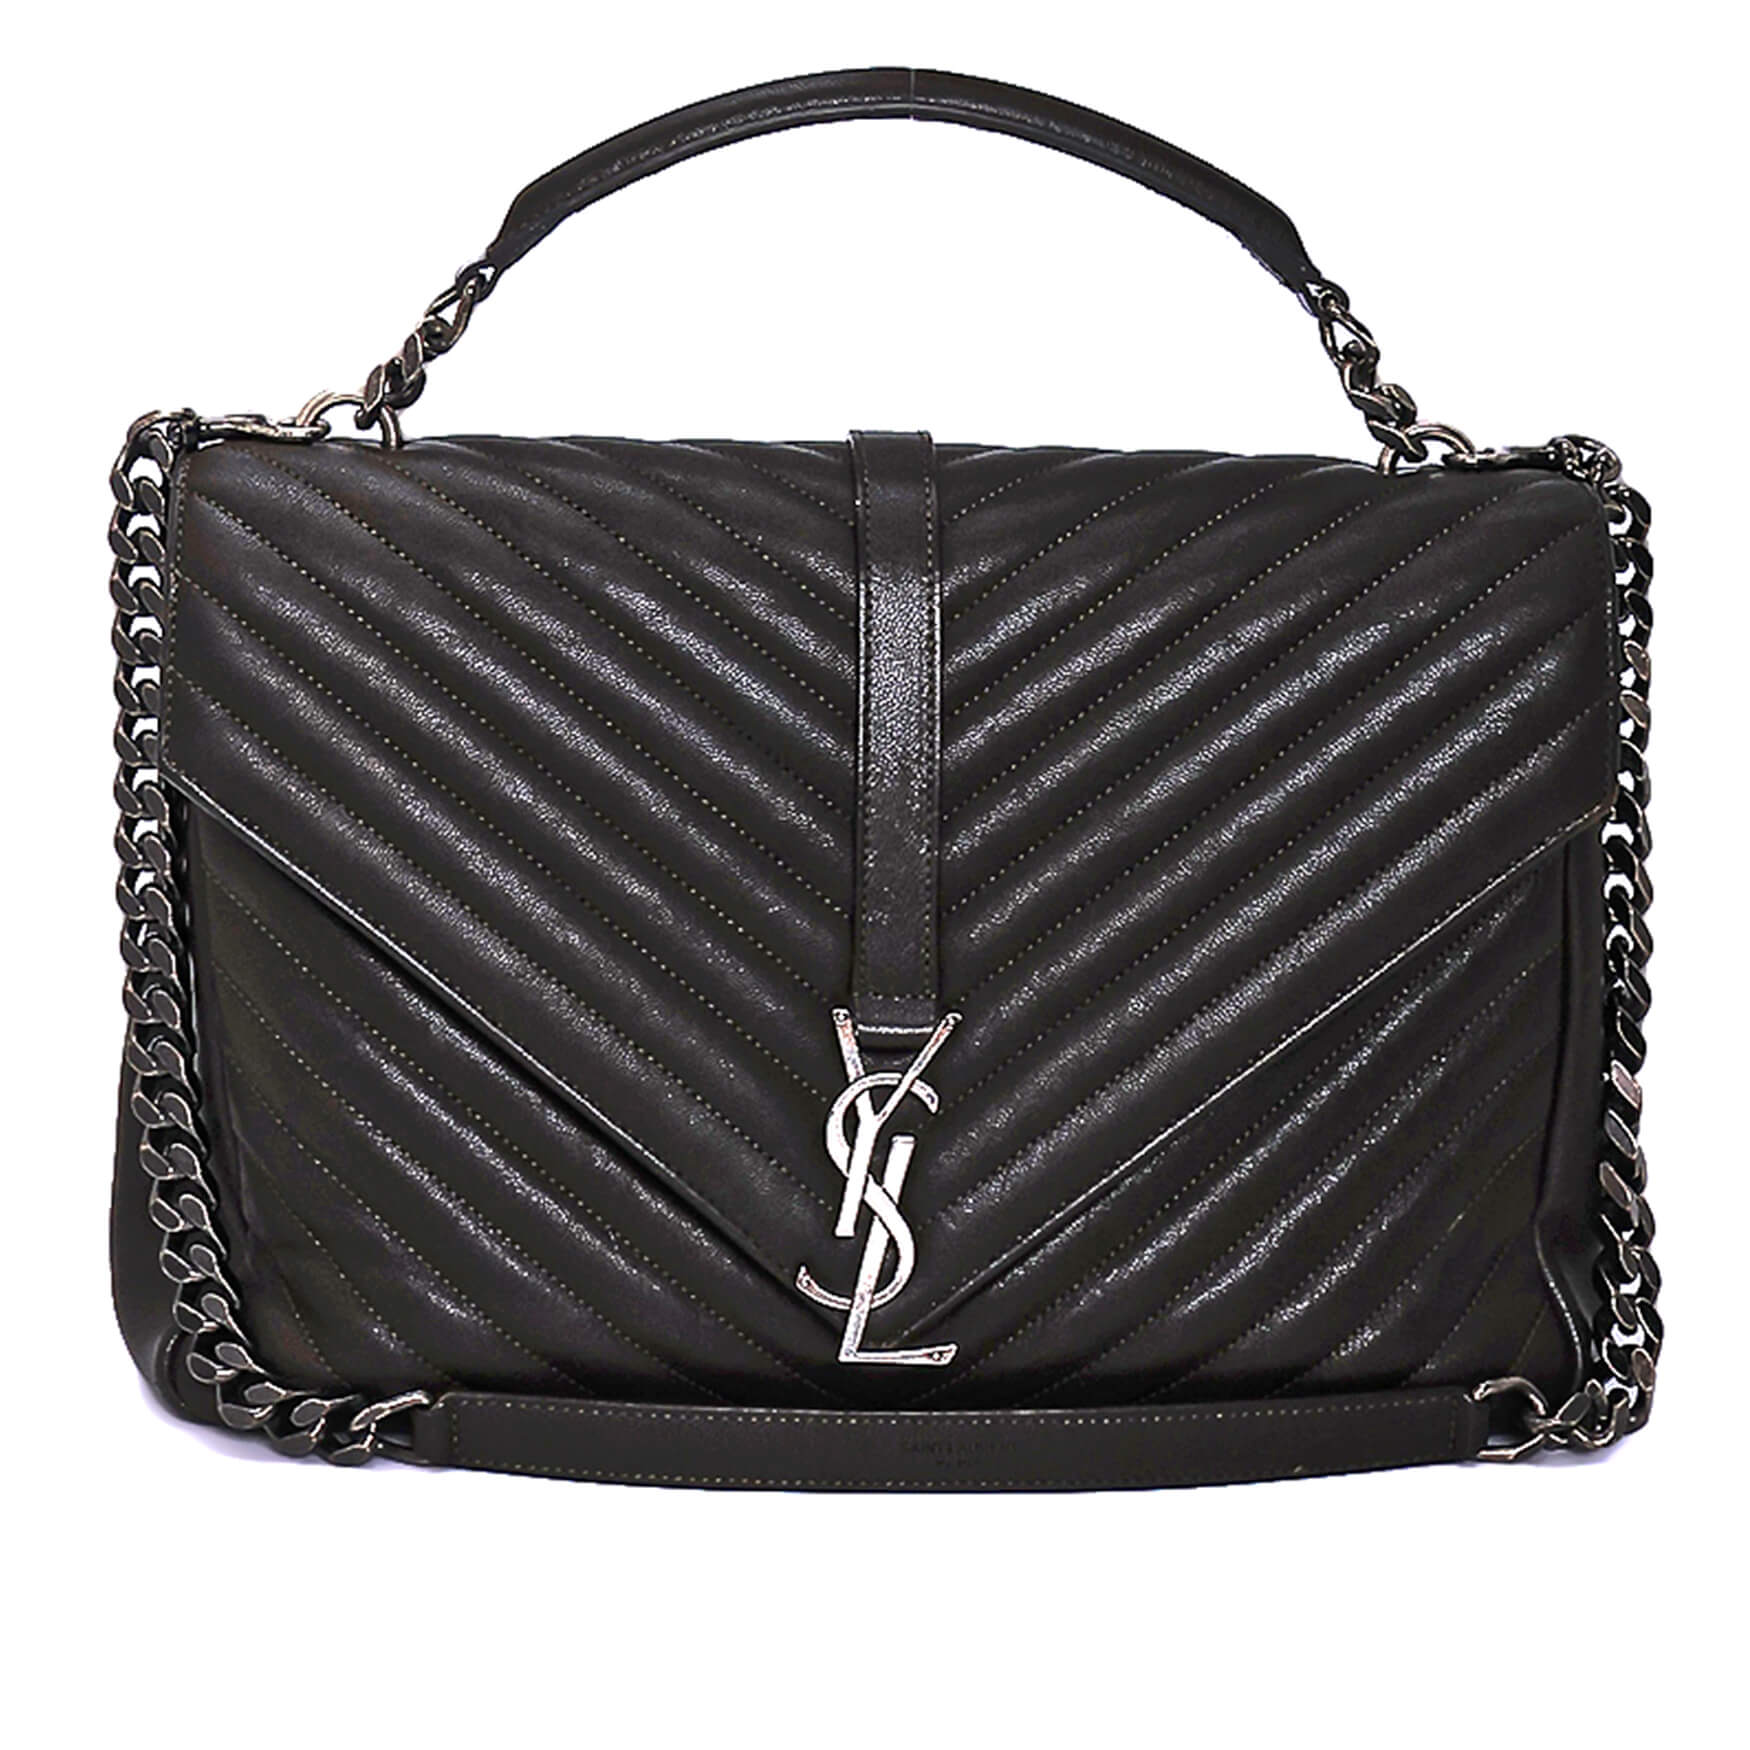 Yves Saint Laurent - Anthracite Chevron Leather Large Collage Bag